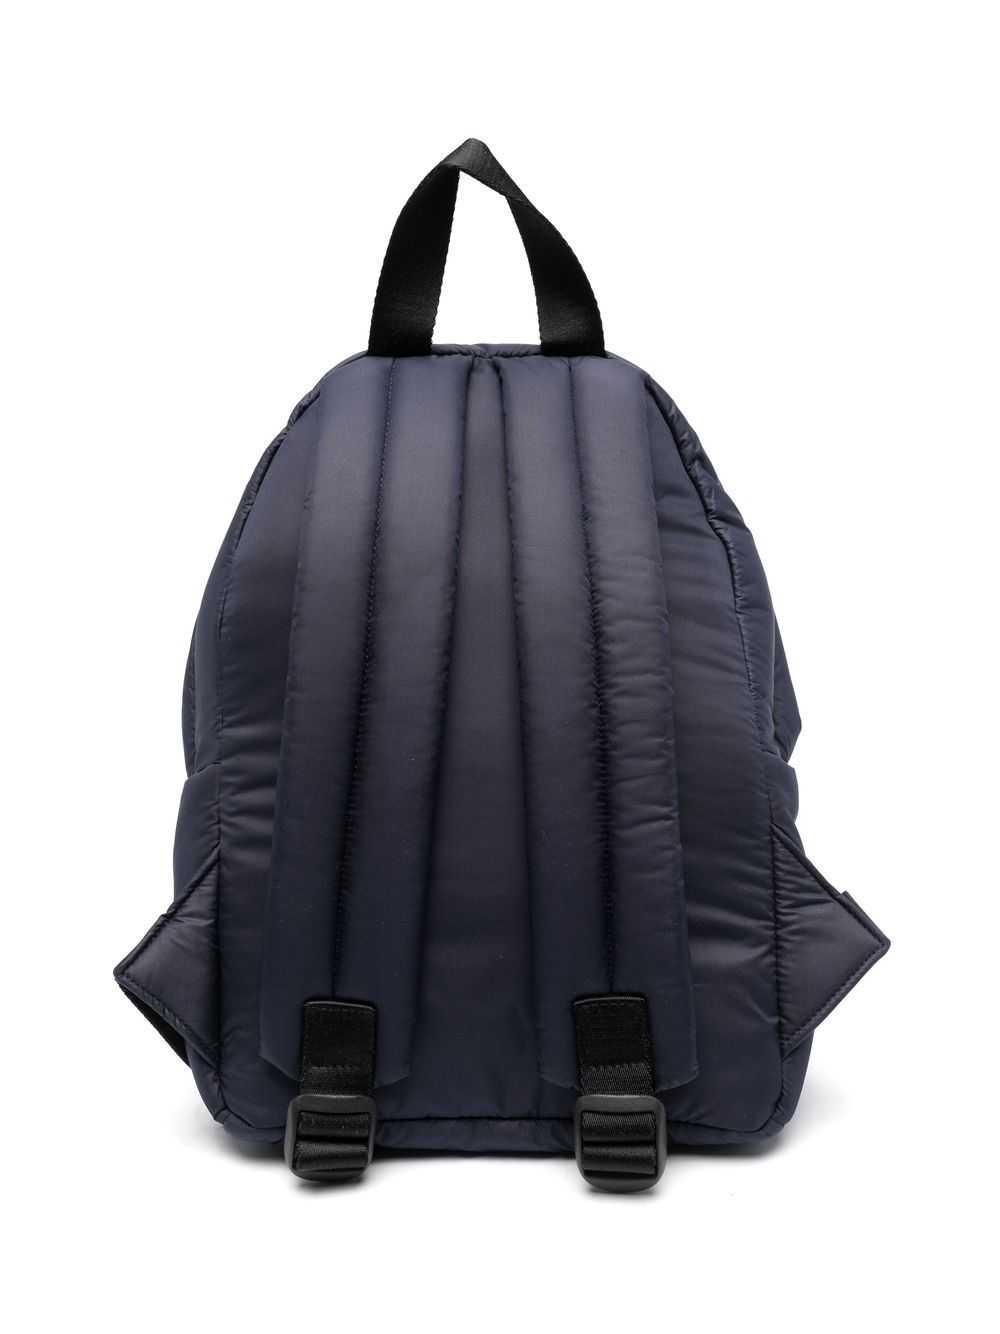 CURVED LOGO LITTLE BACKPACK NAVY BLUE WH